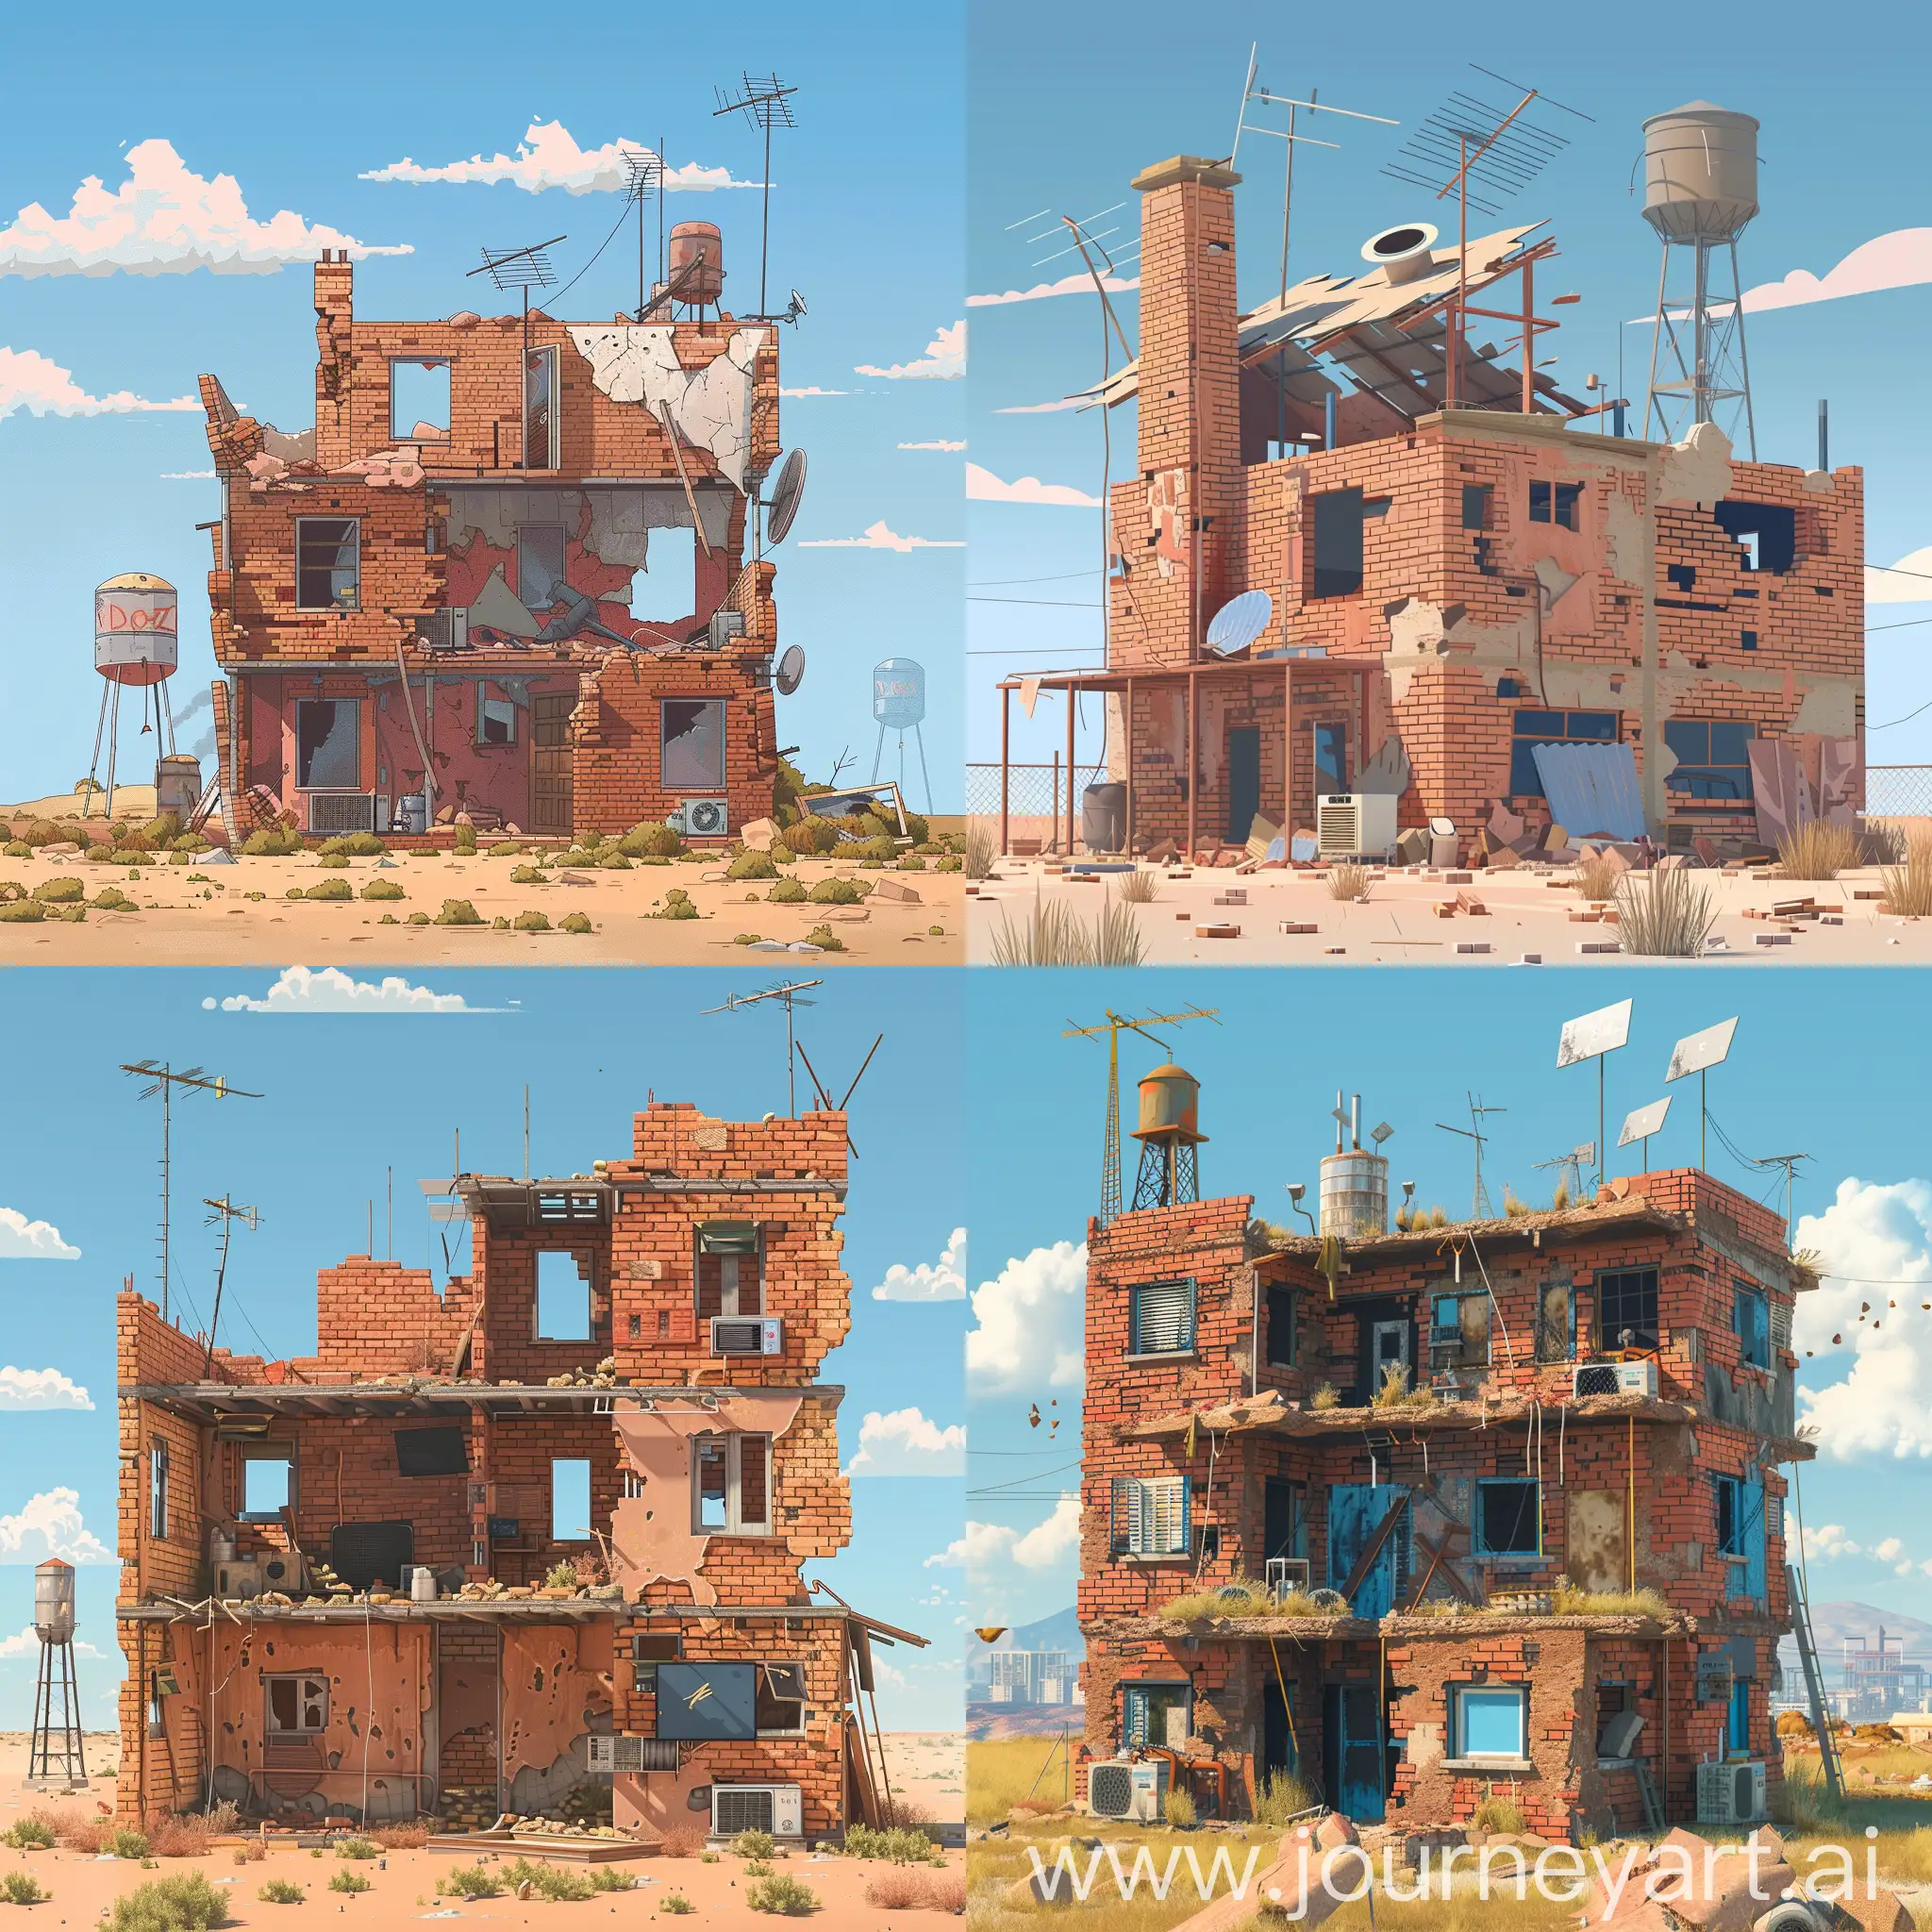 Desolate-5Story-Brick-Residential-Rural-House-in-Ruins